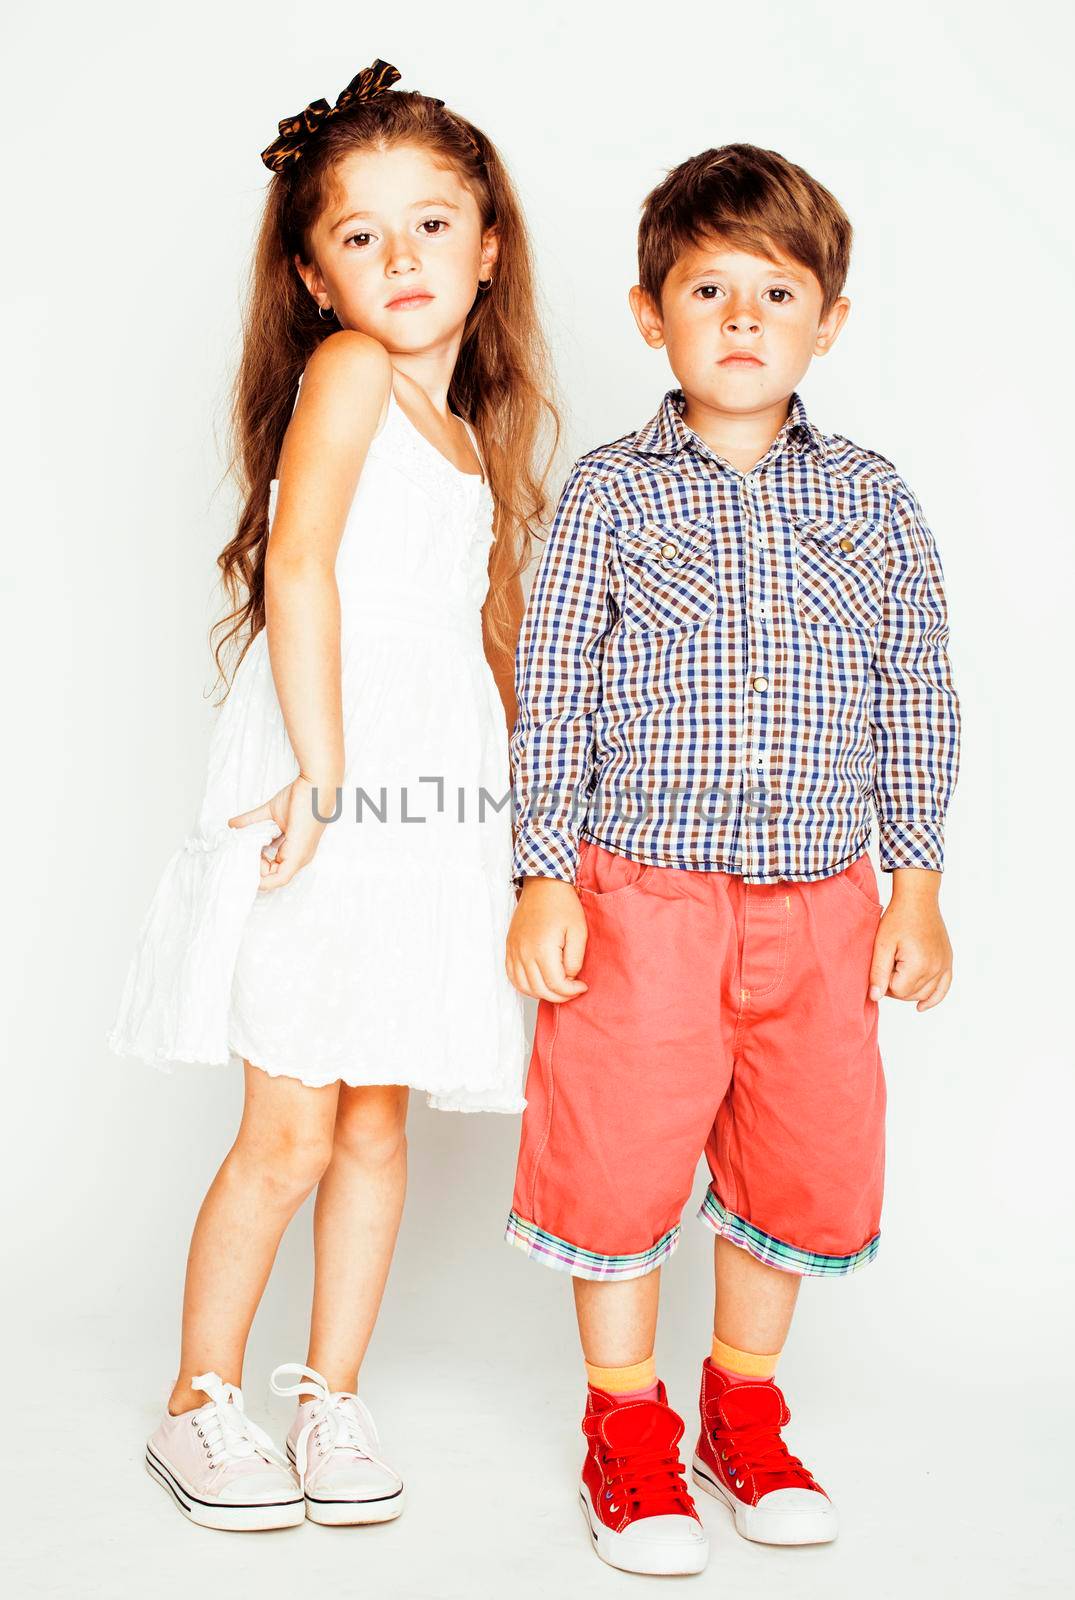 little cute boy and girl hugging playing on white background, happy family smiling close up